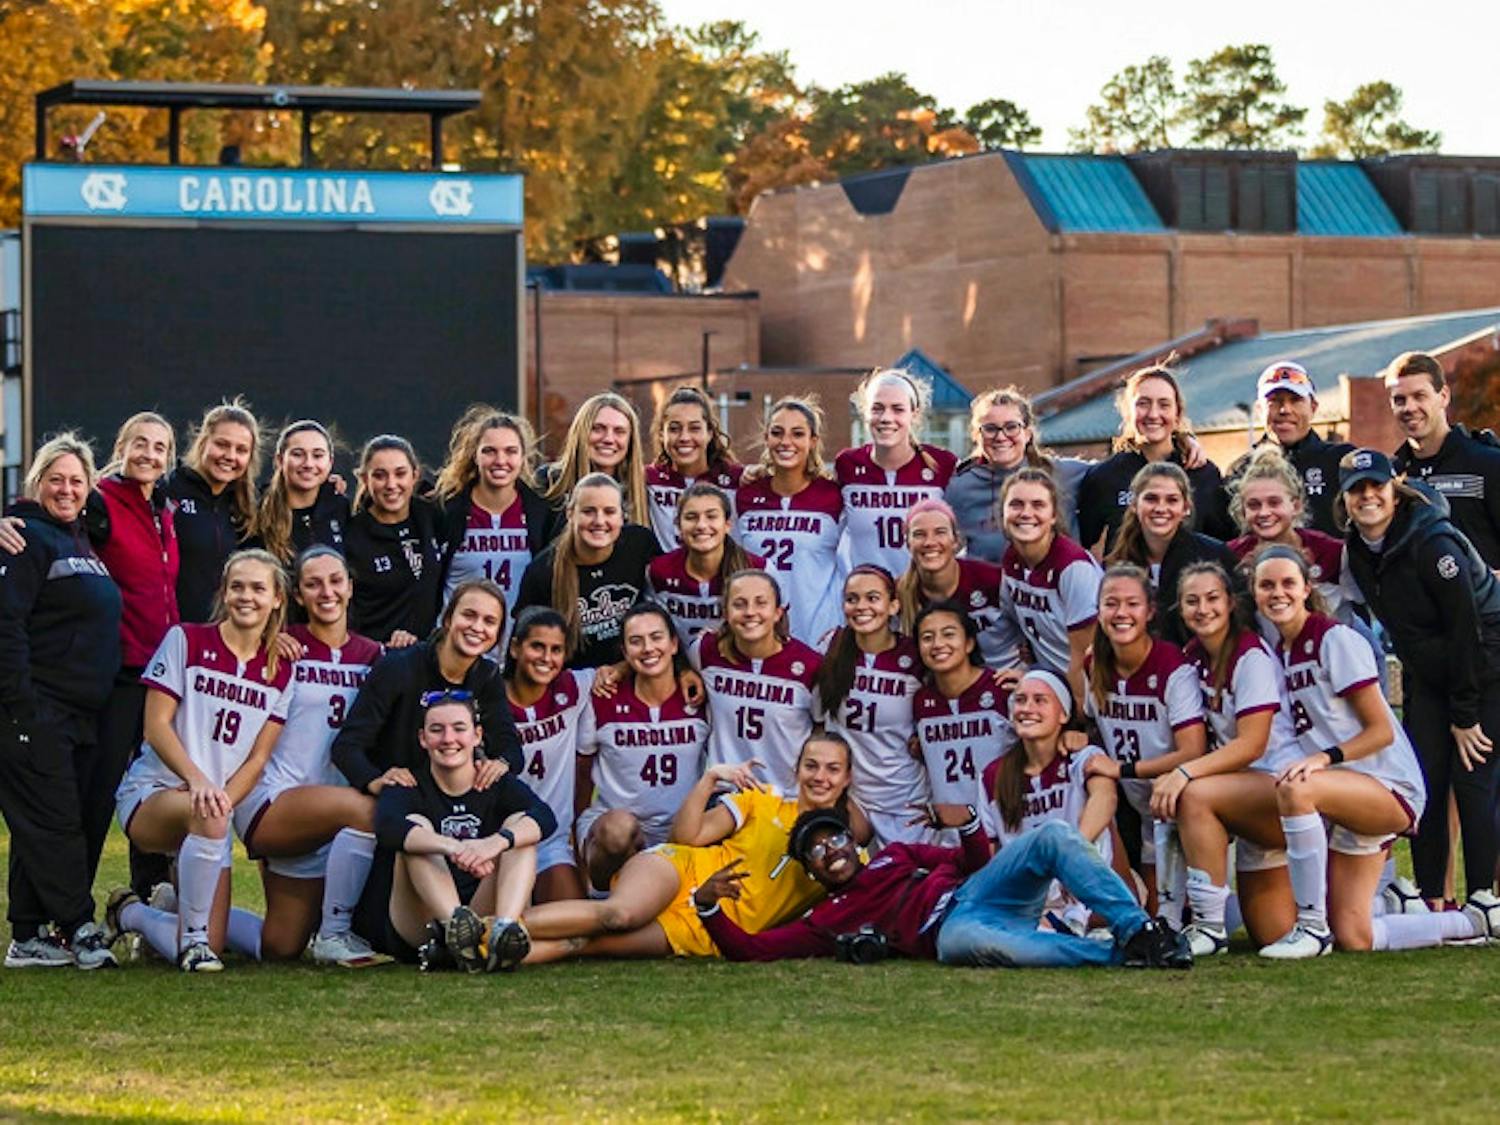 The South Carolina Women's Soccer team poses for a group photo after the NCAA tournament against the University of North Carolina Chapel Hill on November 13, 2021.